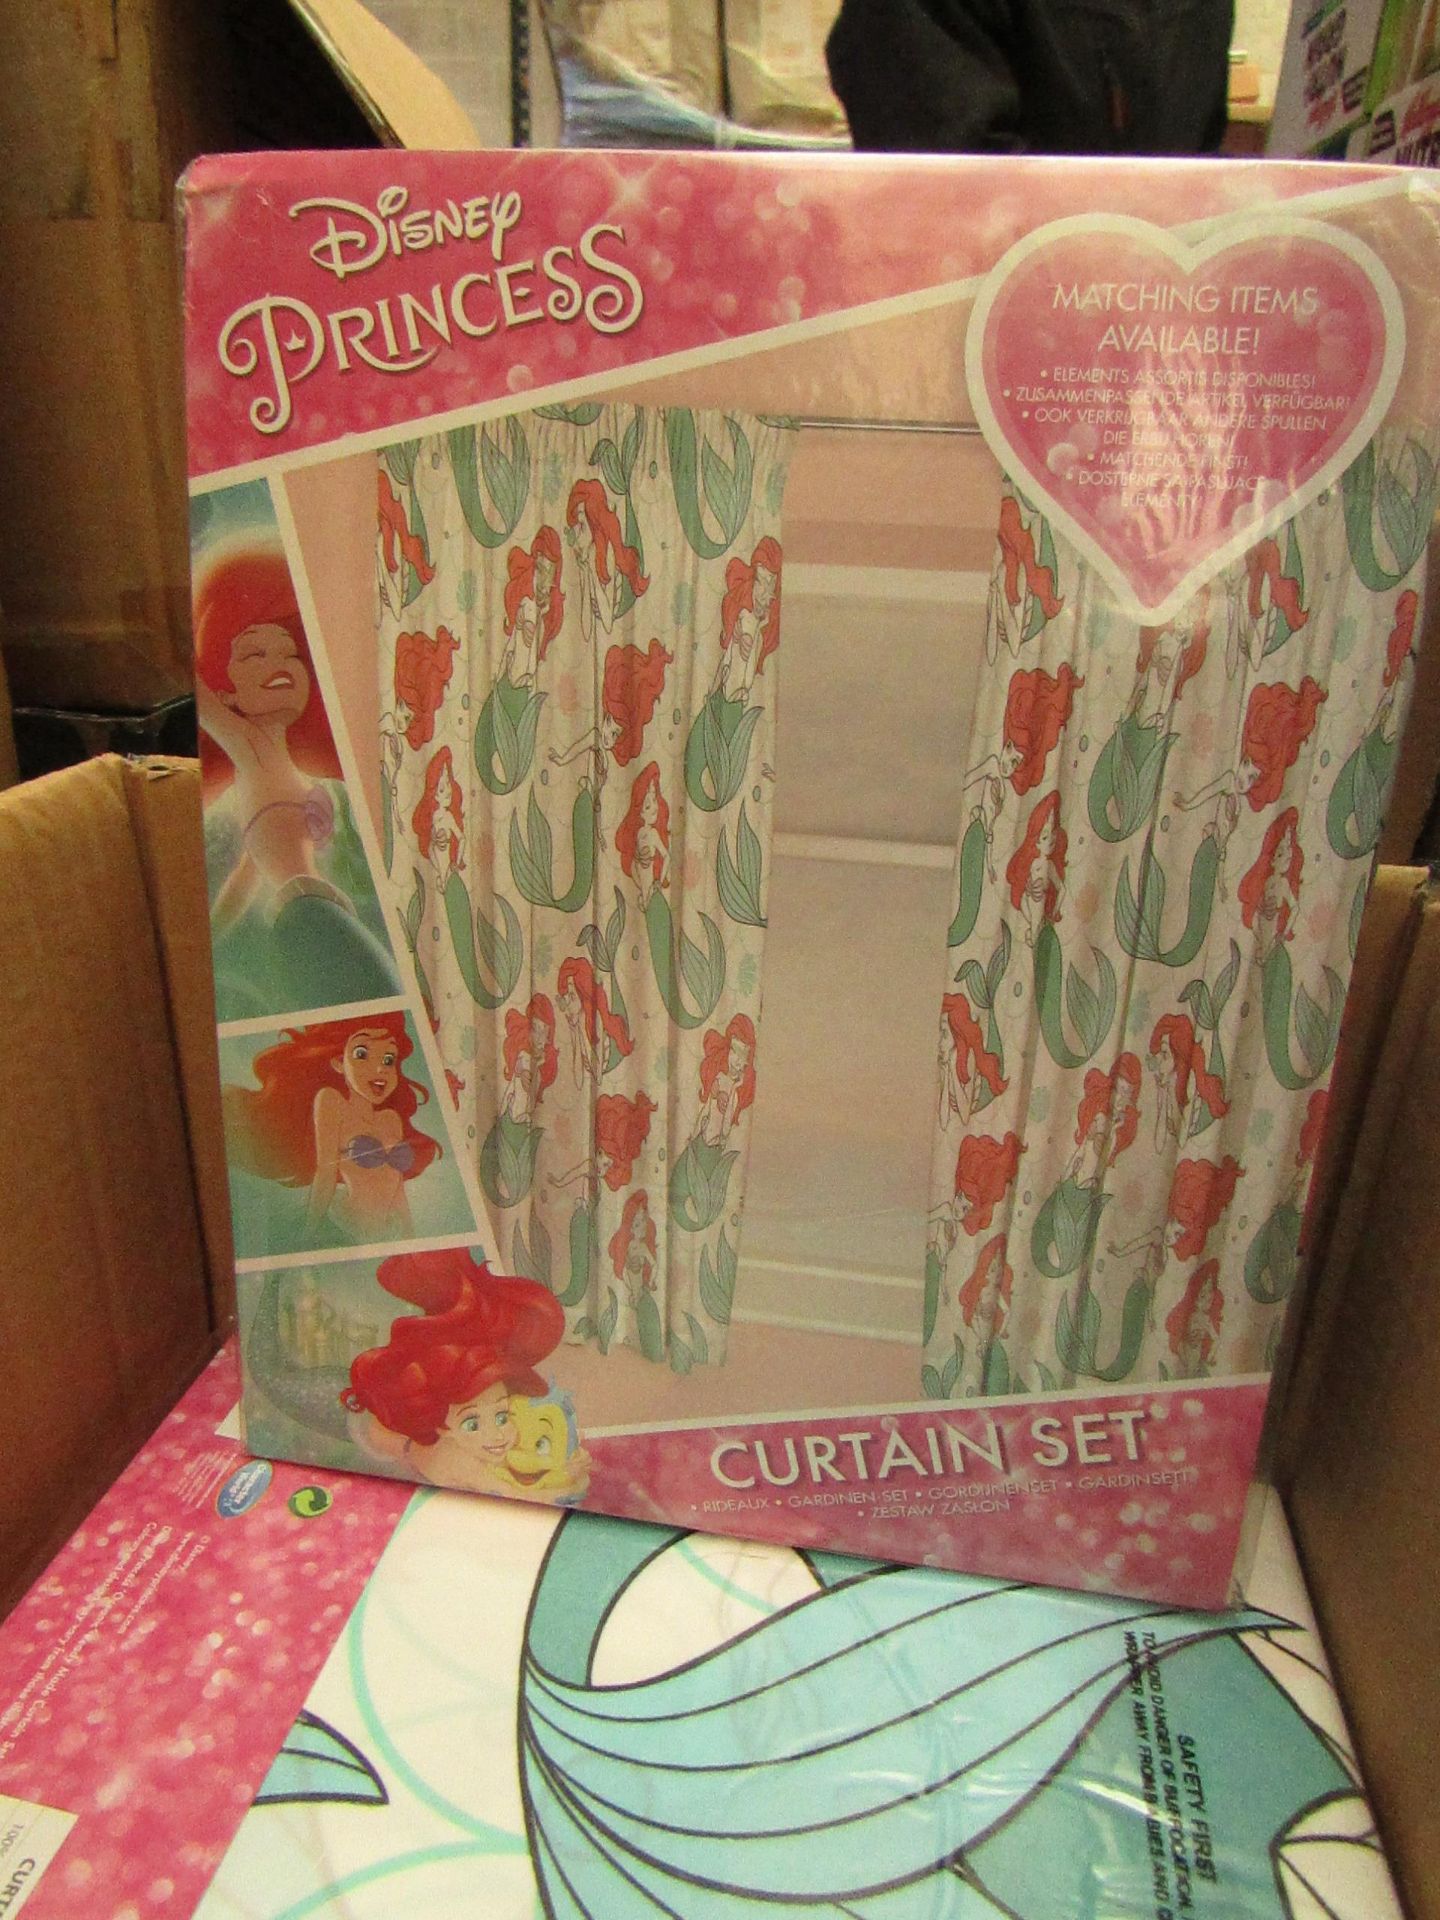 1 x Disney Princess Curtain Set 66" x 54" without Tie Backs new & packaged